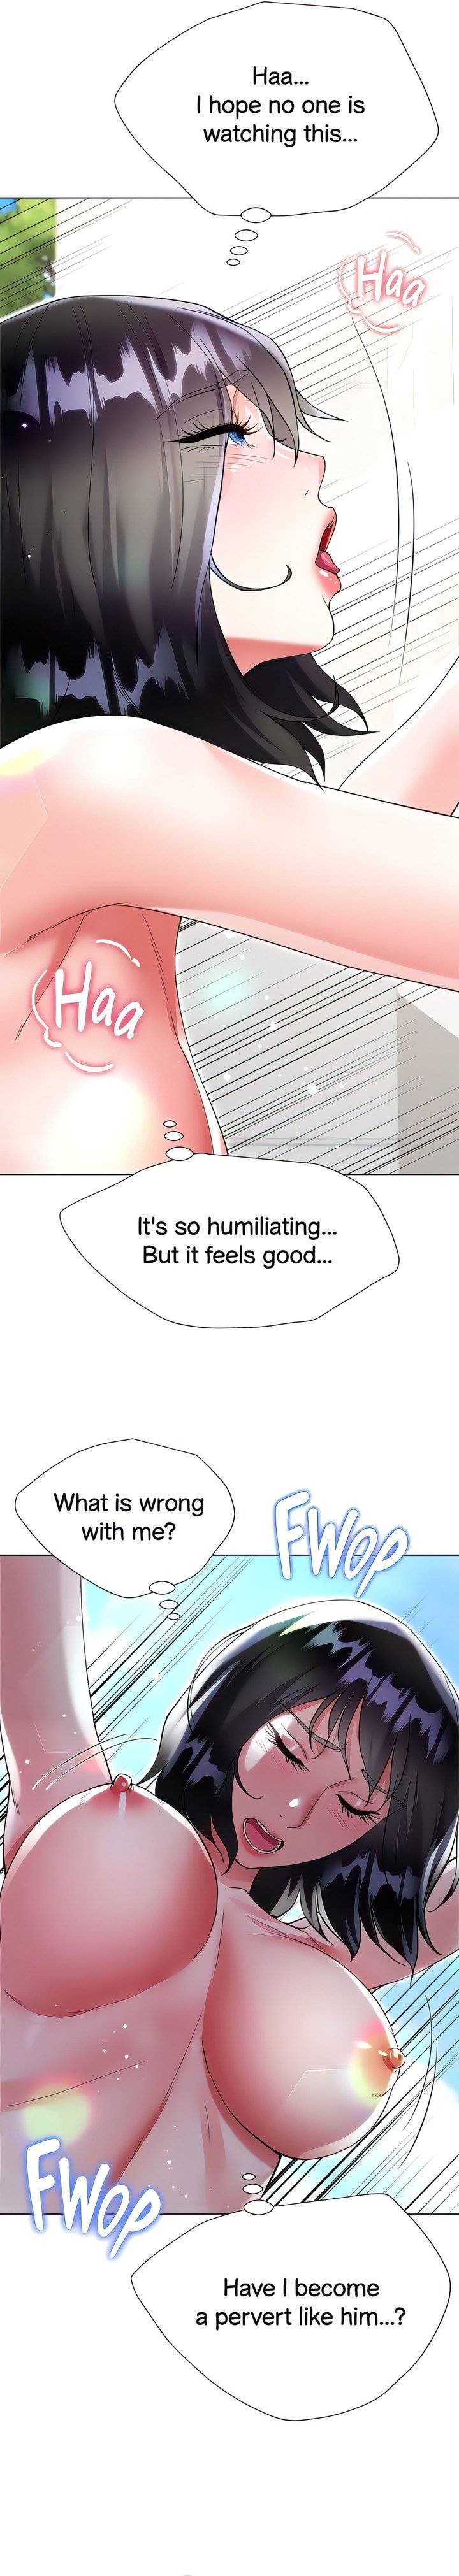 my-sister-in-laws-skirt-chap-47-22